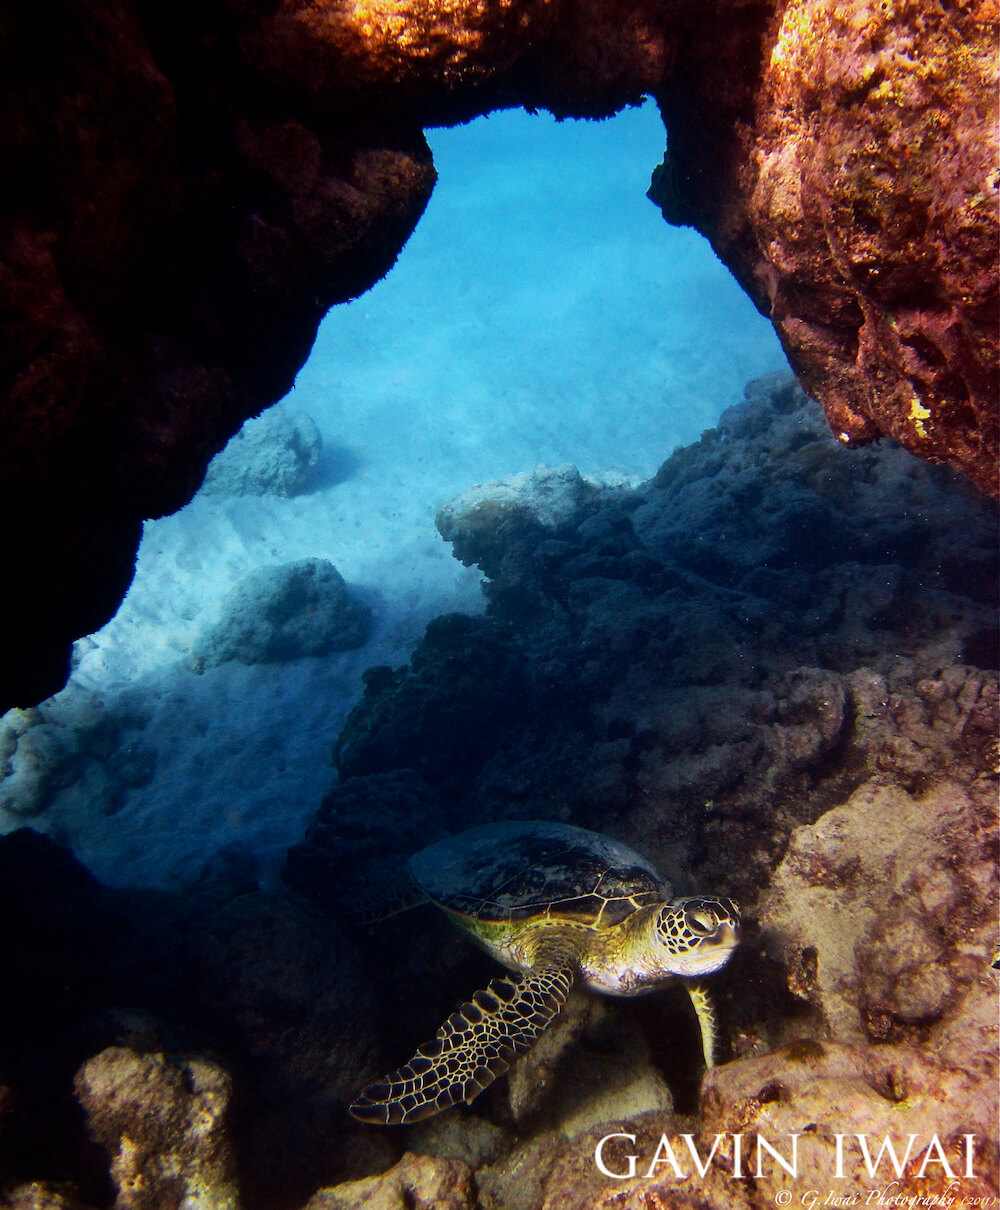 Green sea turtle cruising out of an arch-like structure.